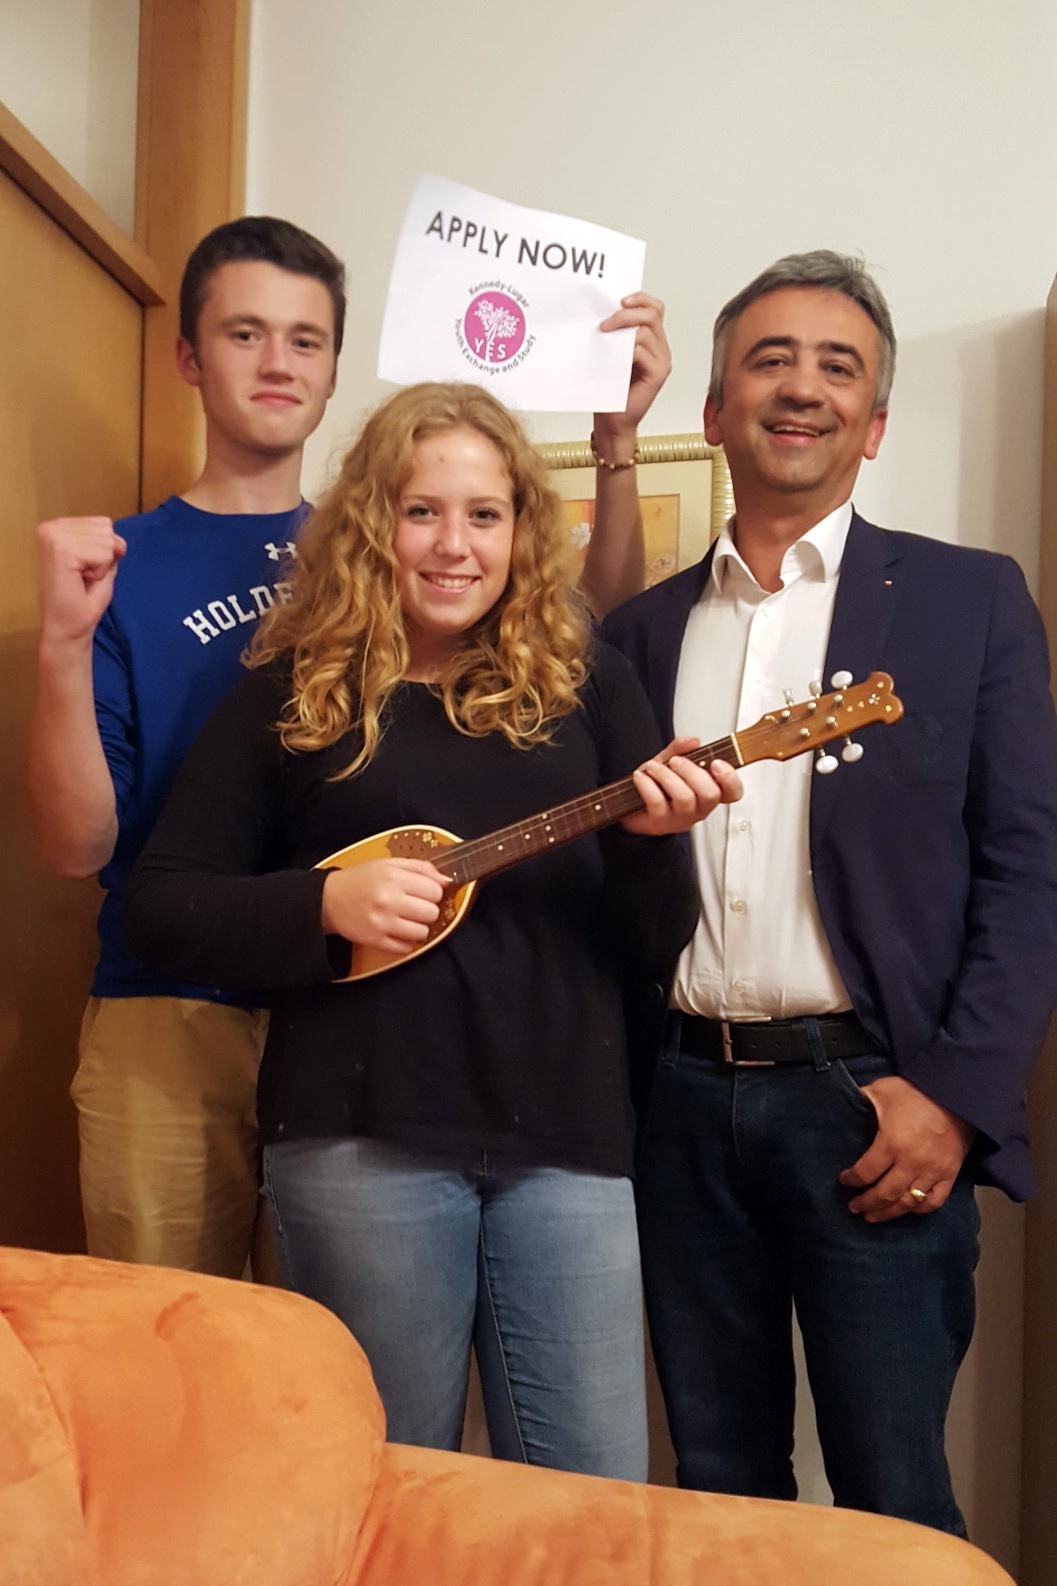 Tana With Her Hdad And Other Yes Abroad Student Playing The Tamburica